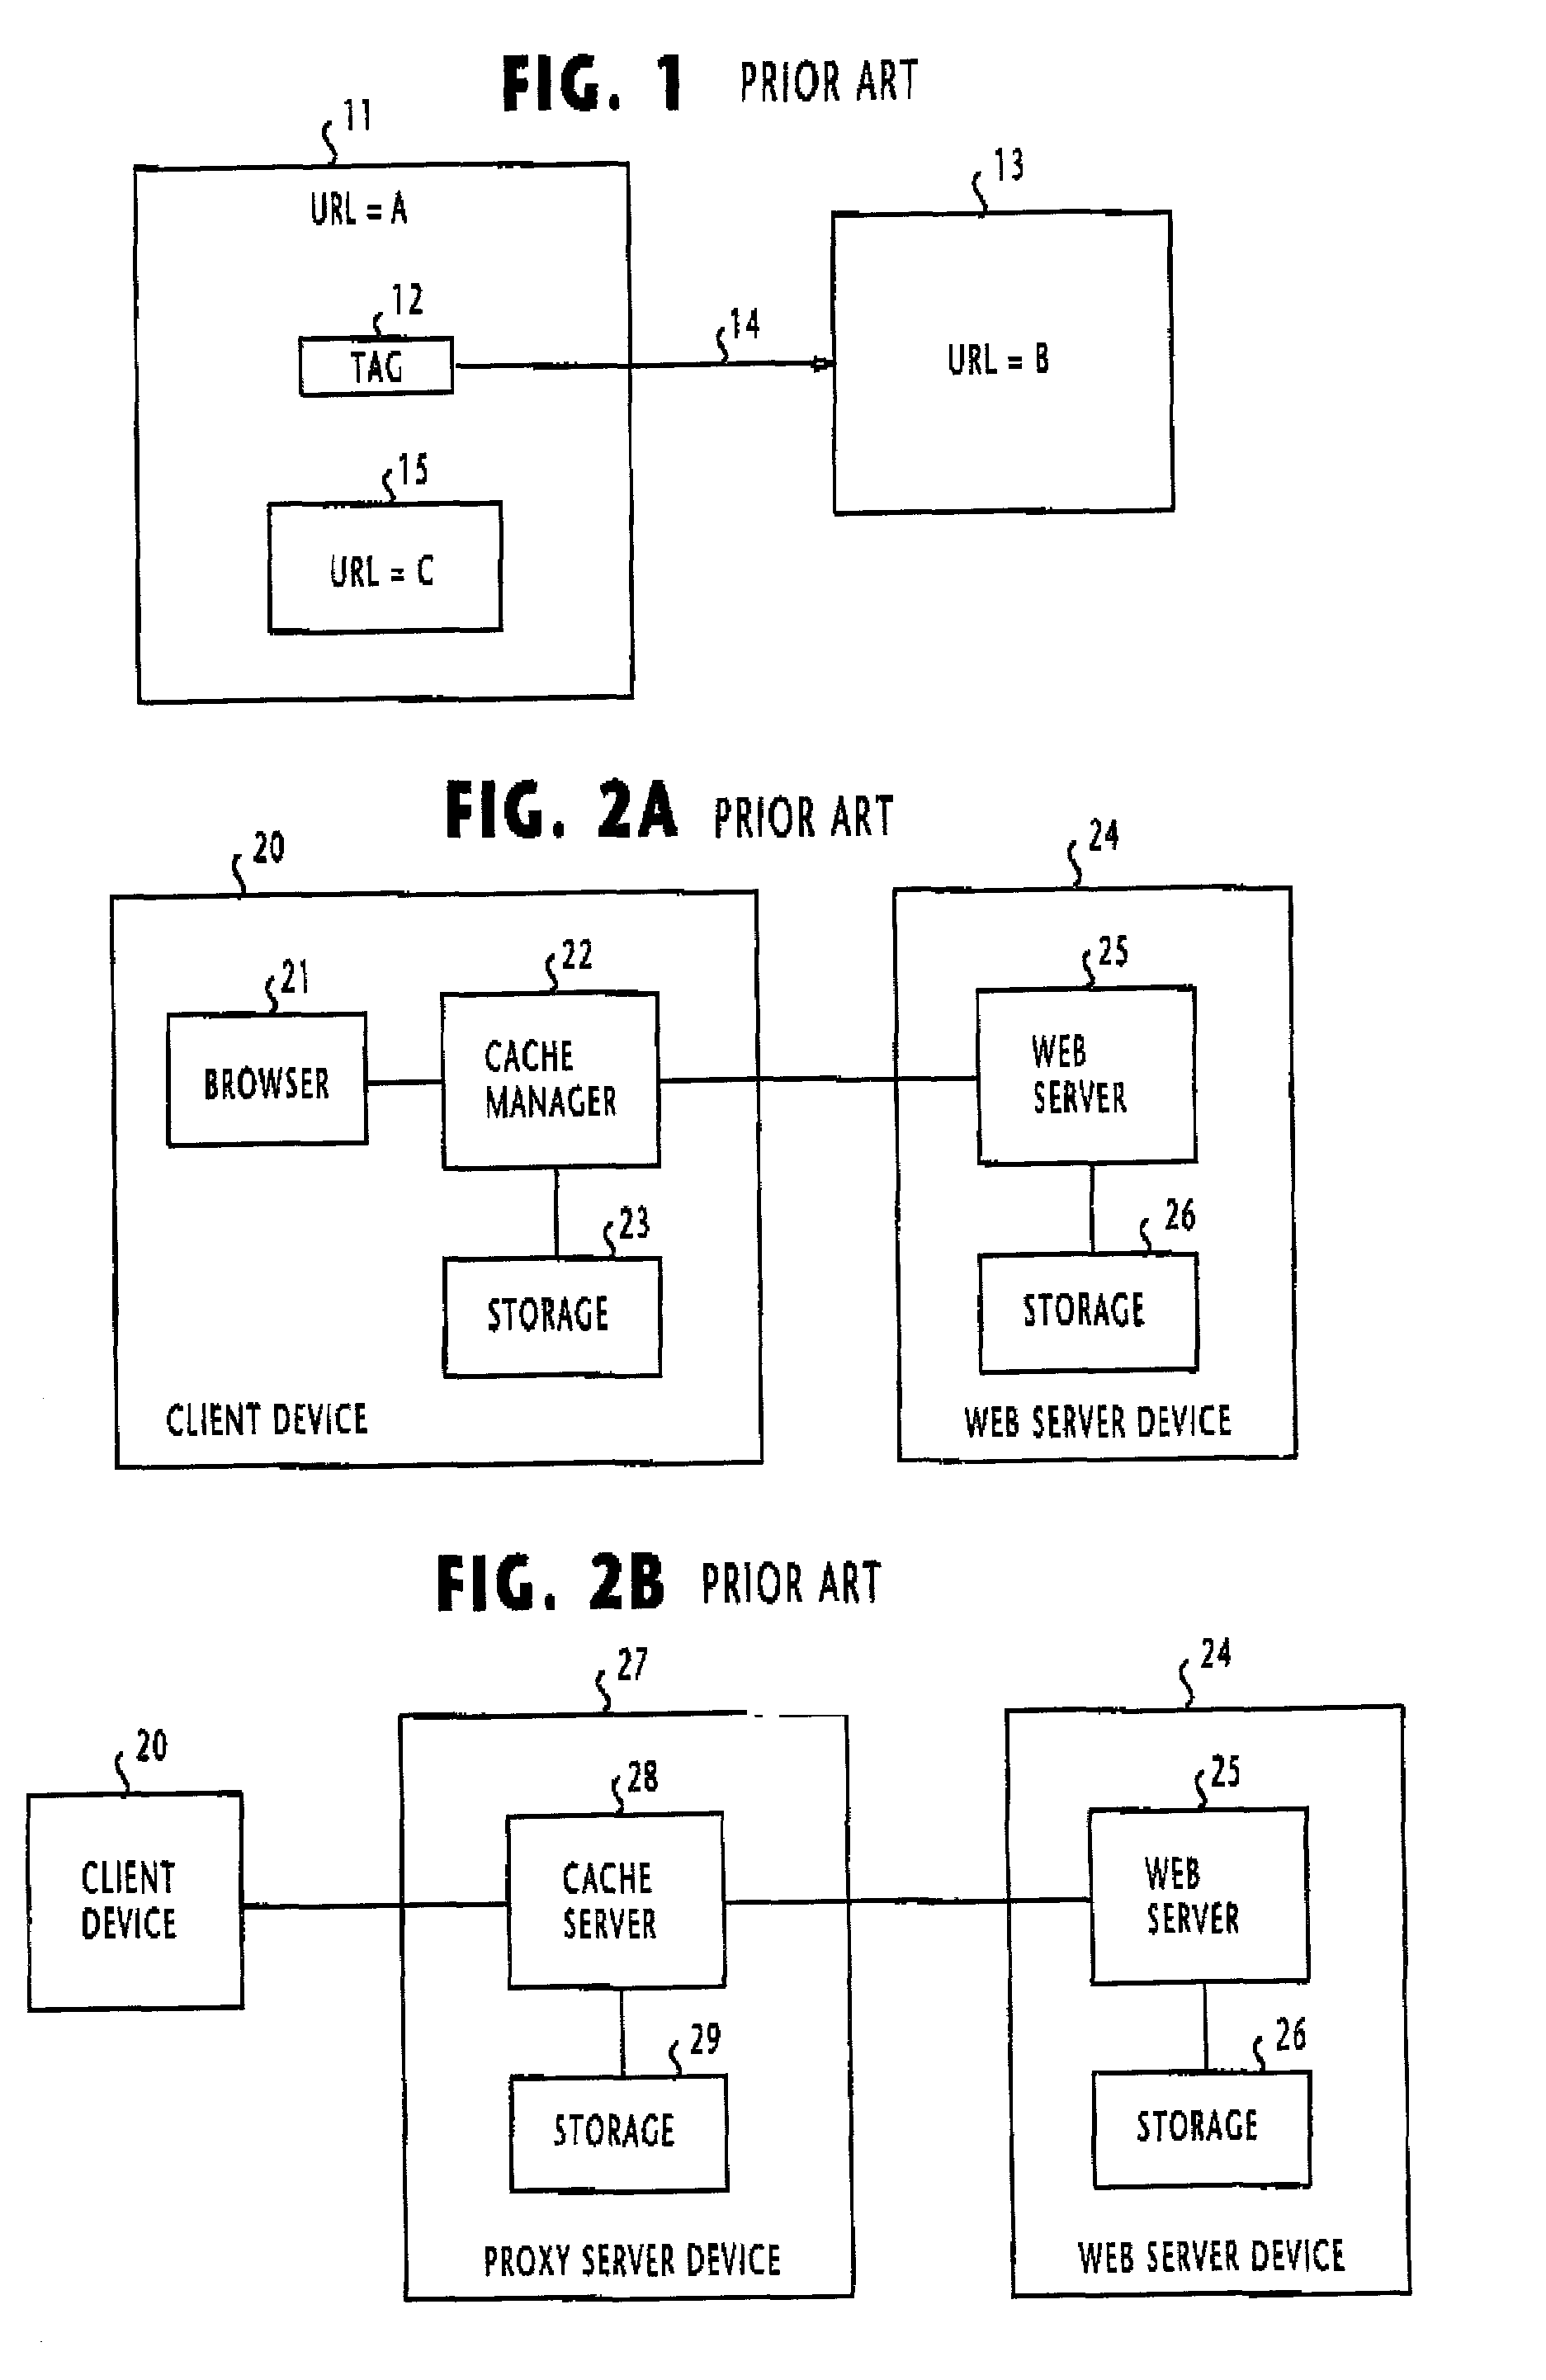 Method of prefetching reference objects using weight values of referrer objects